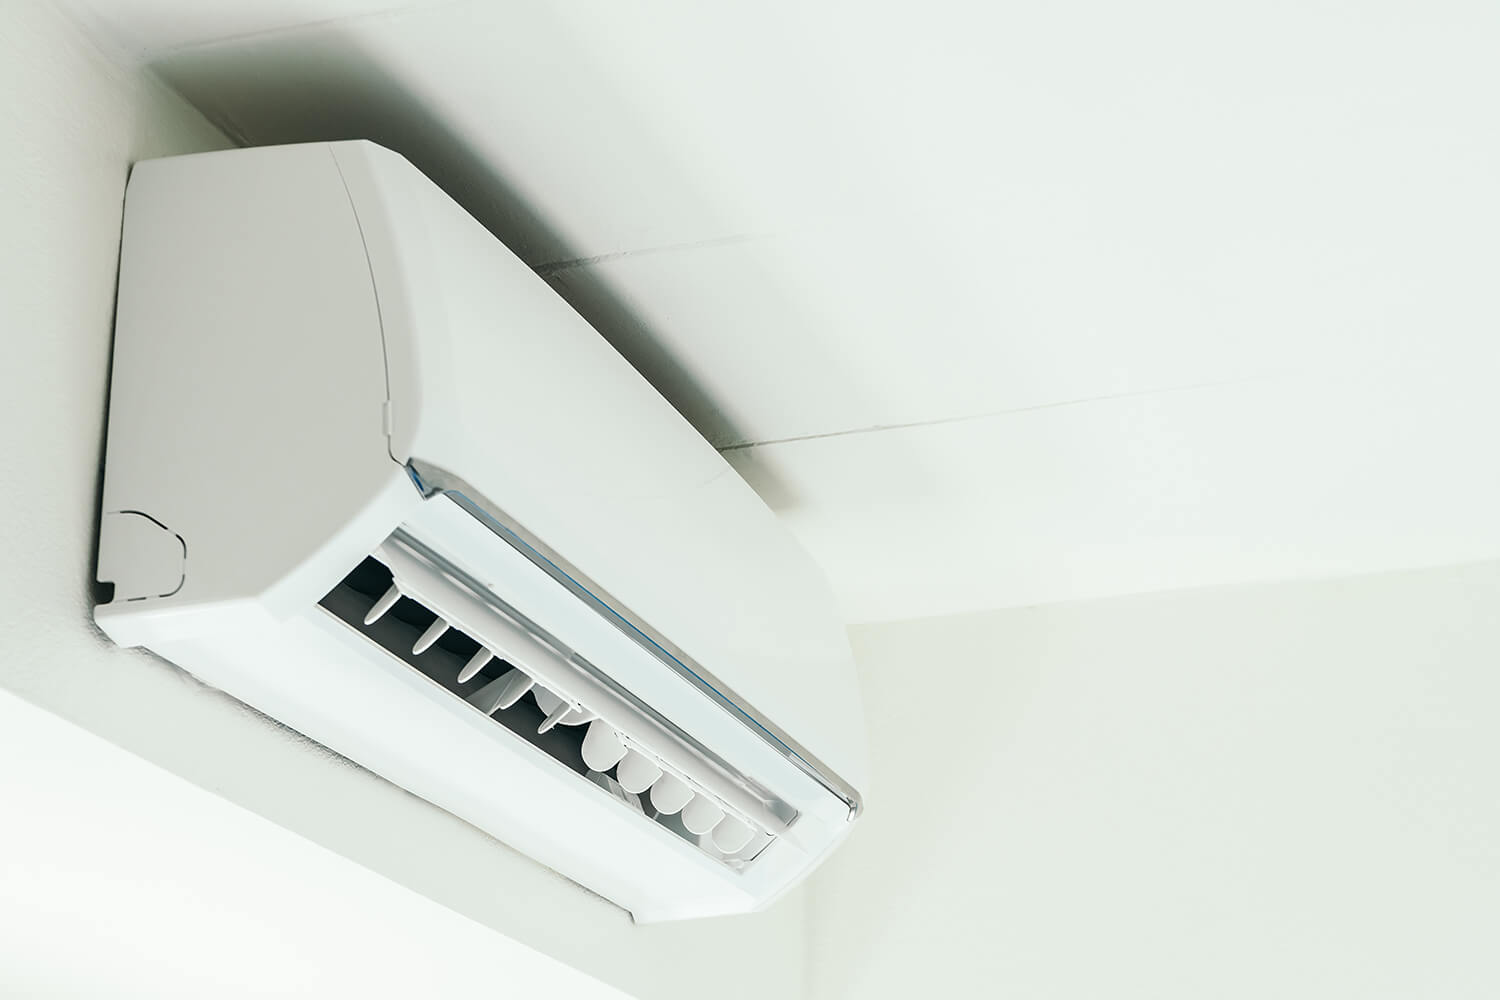 Hot Summers and Cold Winters Call for a fantastic Heating, Ventilation, and A/C System